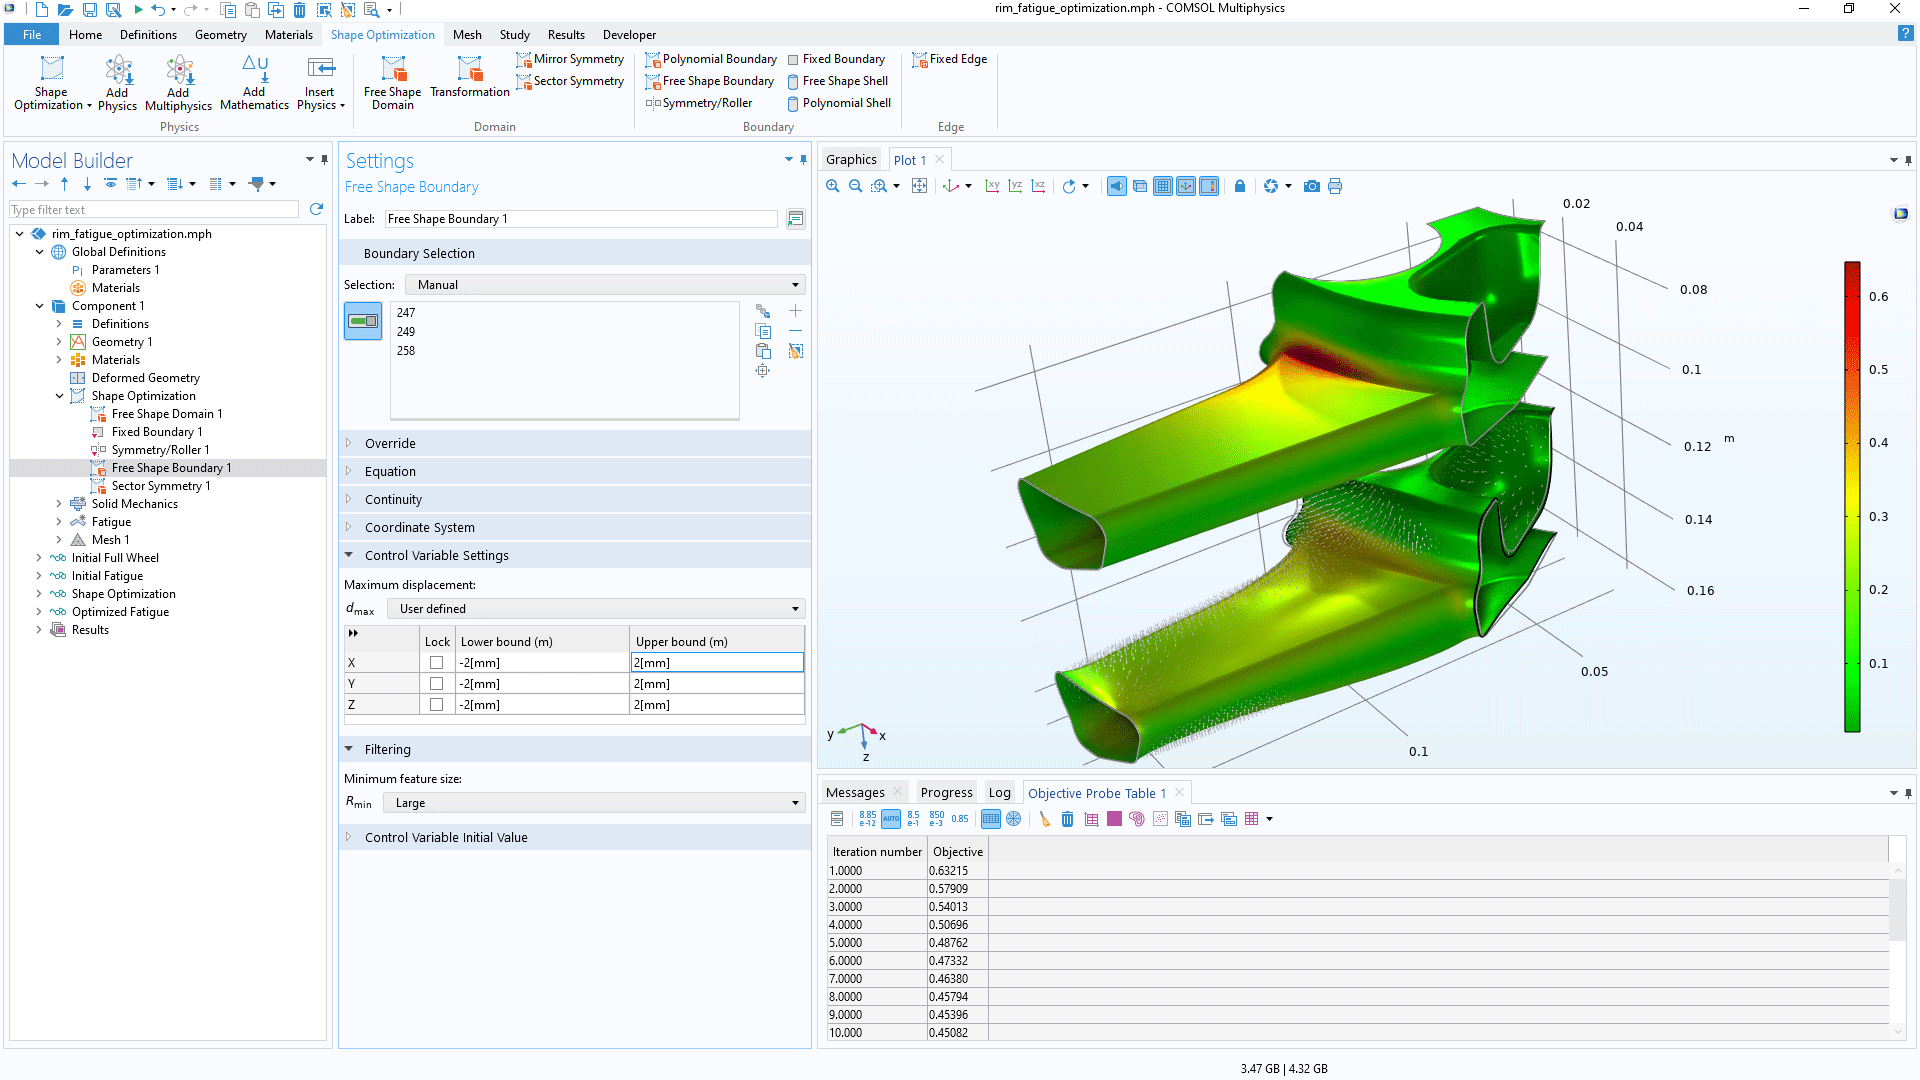 The COMSOL Multiphysics UI showing the Model Builder with the Free Shape Boundary node highlighted, the corresponding Settings window, and a wheel rim model in the Graphics window.